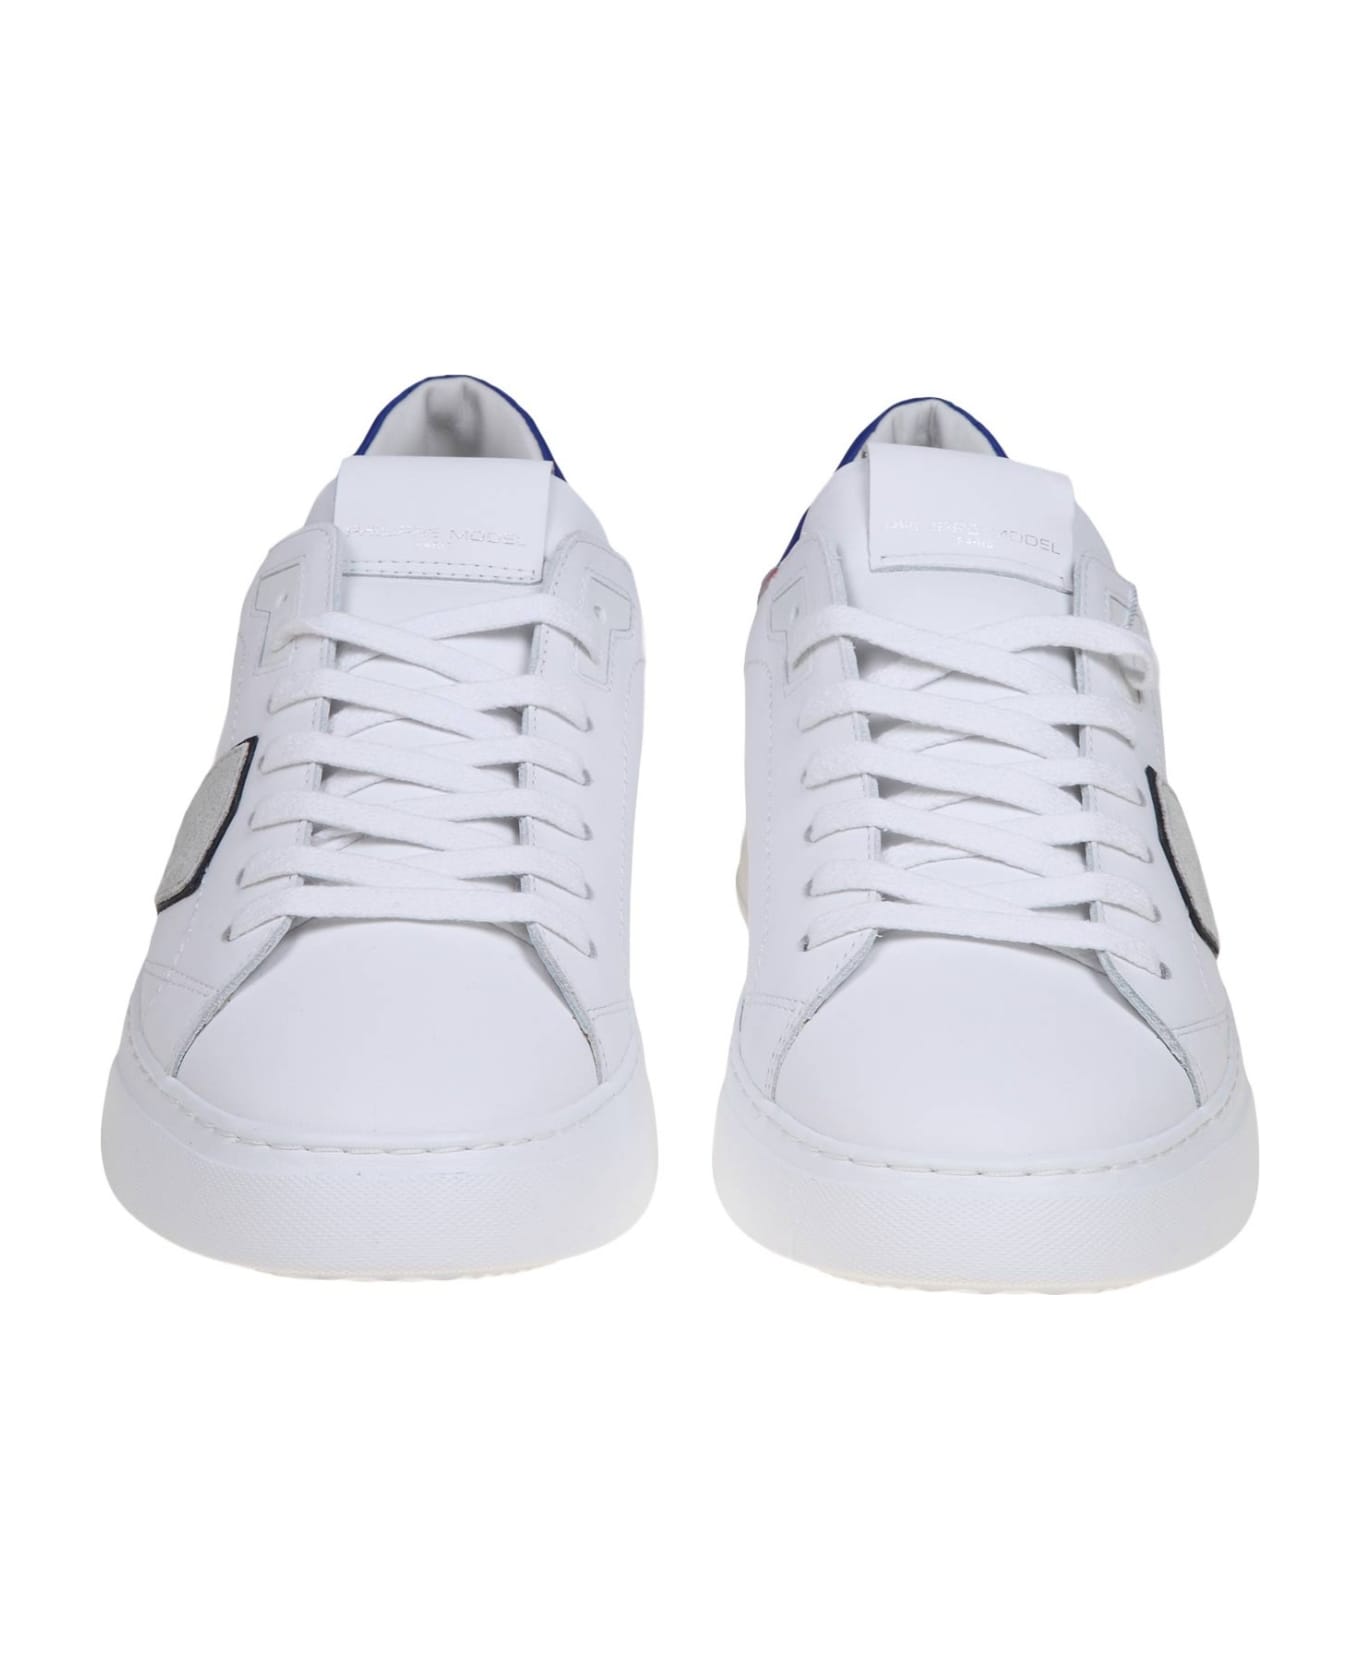 Philippe Model Temple Low Sneakers In White And Blue Leather - WHITE/BLUETTE スニーカー